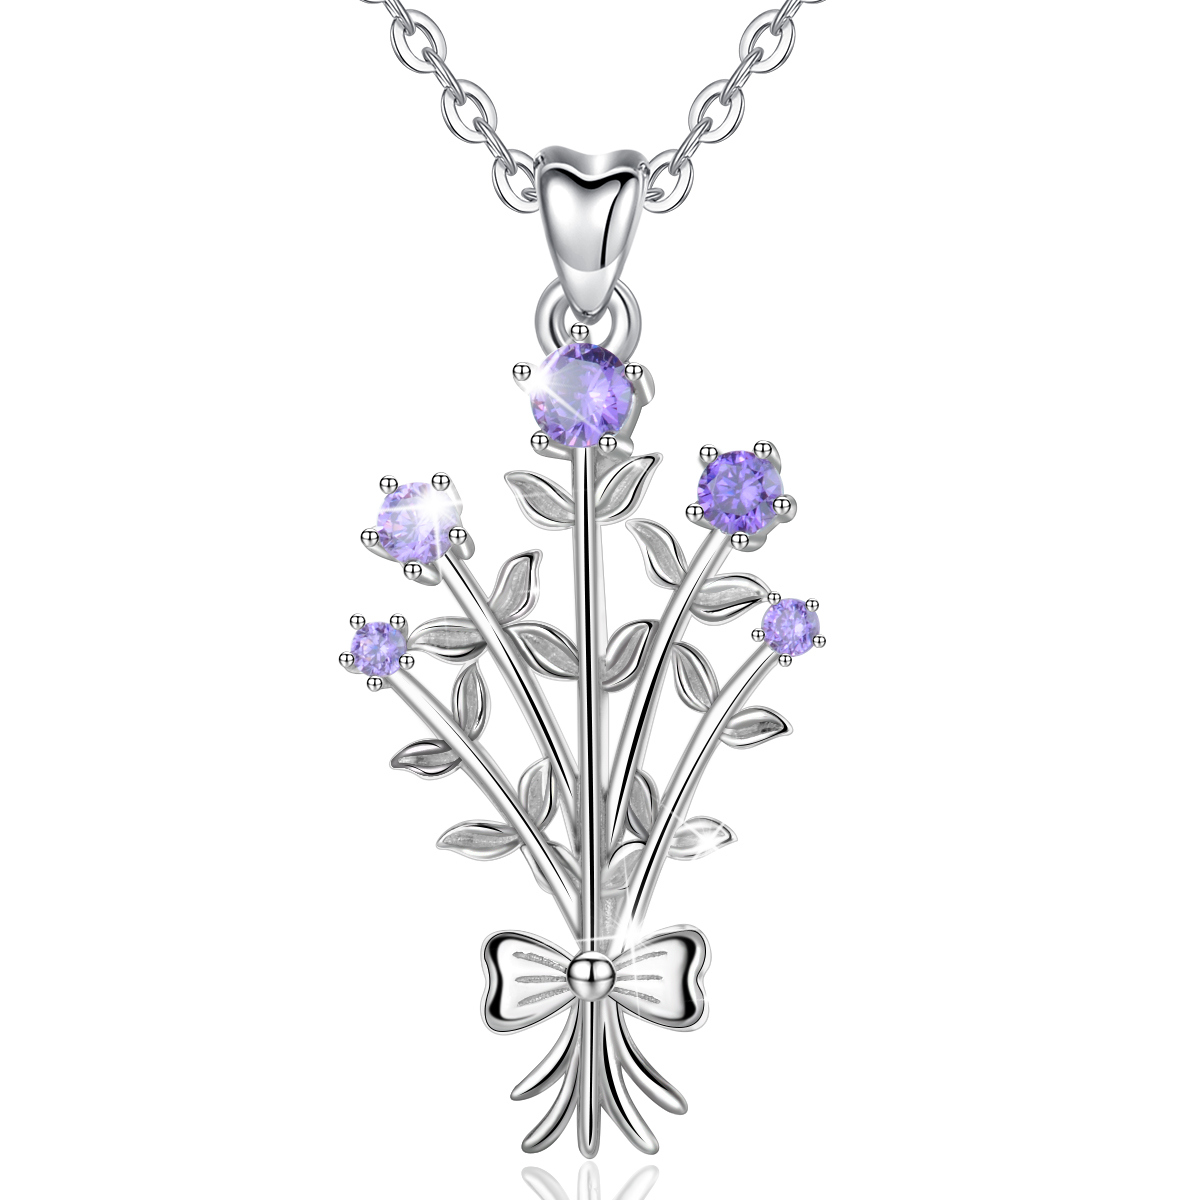 Merryshine Jewelry S925 Sterling Silver Purple Zirconia Flower Nosegay Pendant Necklace for Girls